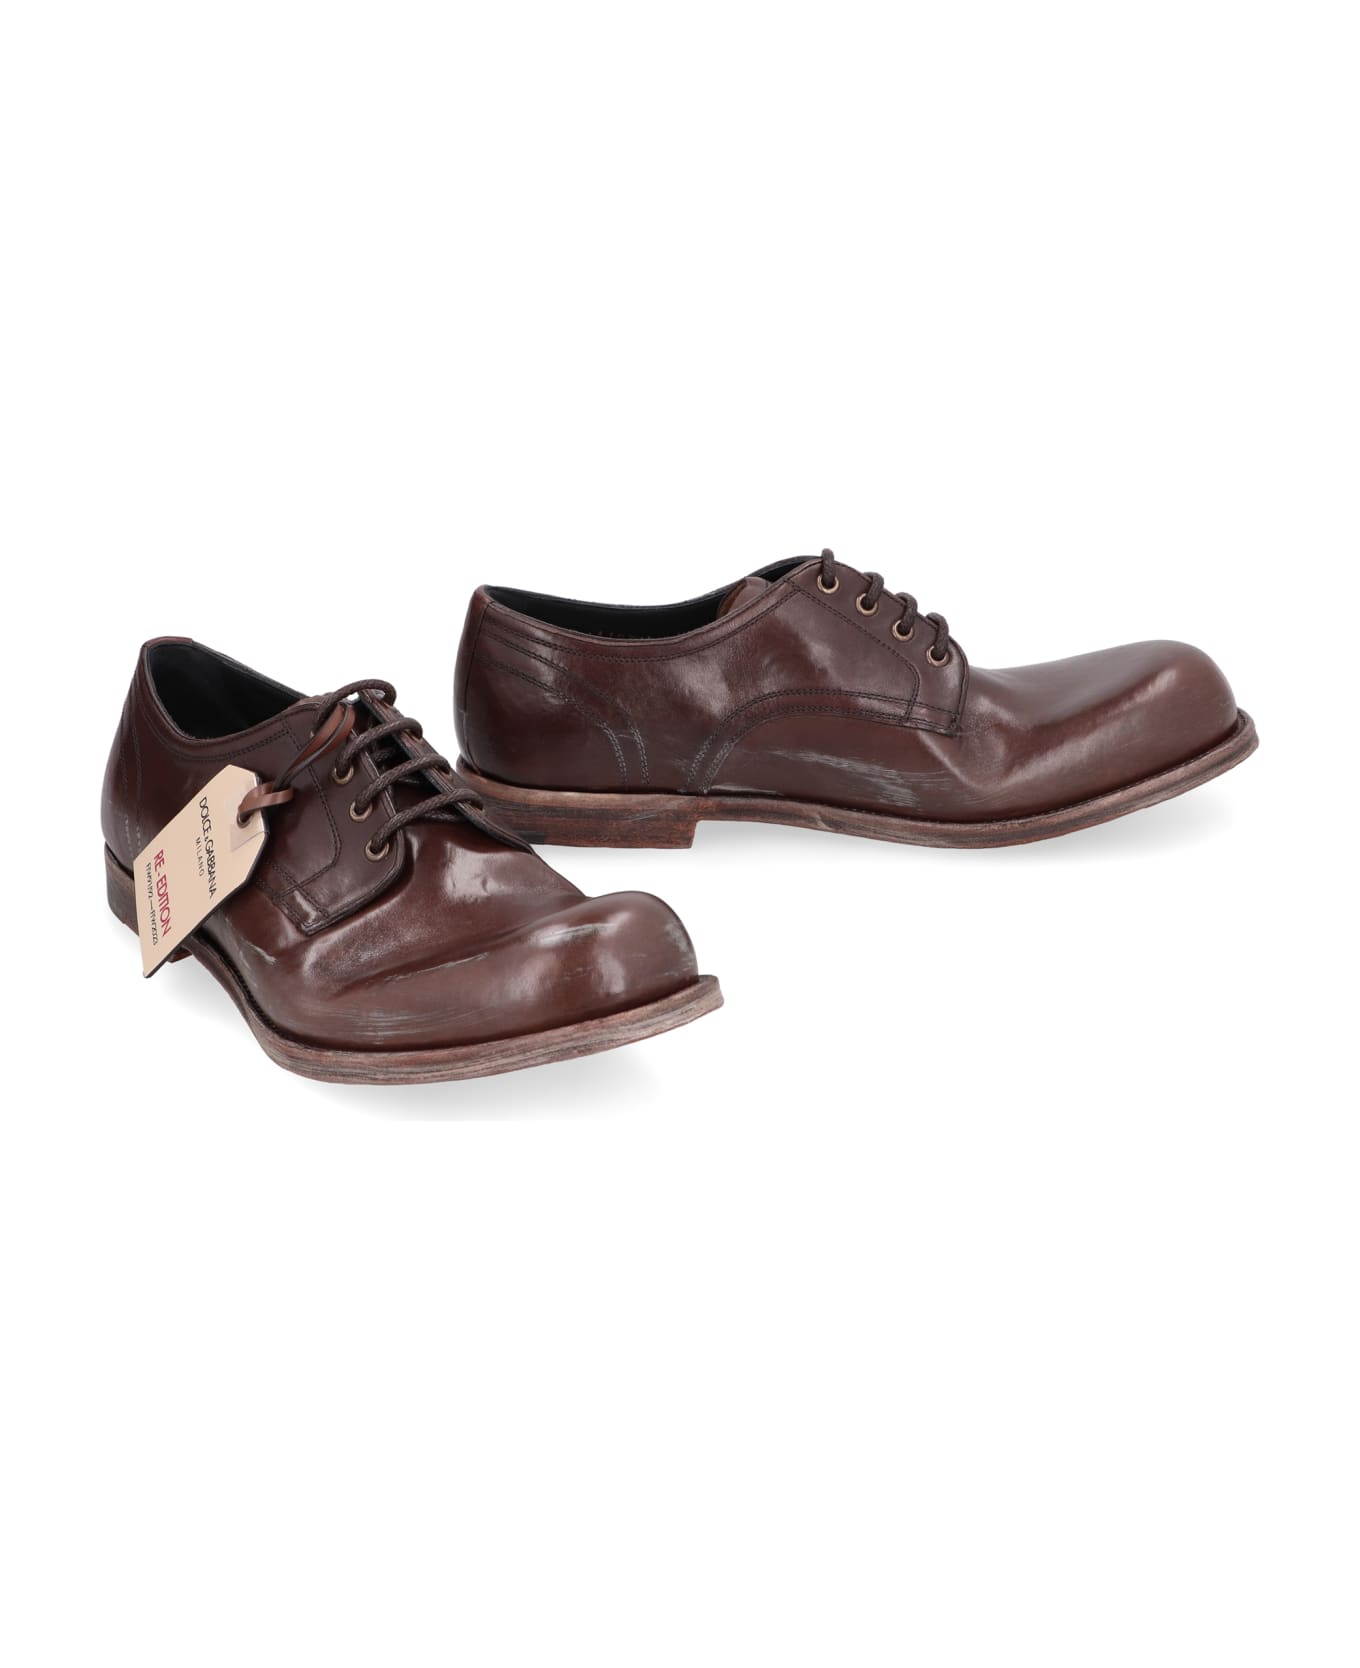 Dolce & Gabbana Leather Lace-up Derby Shoes - Saddle Brown